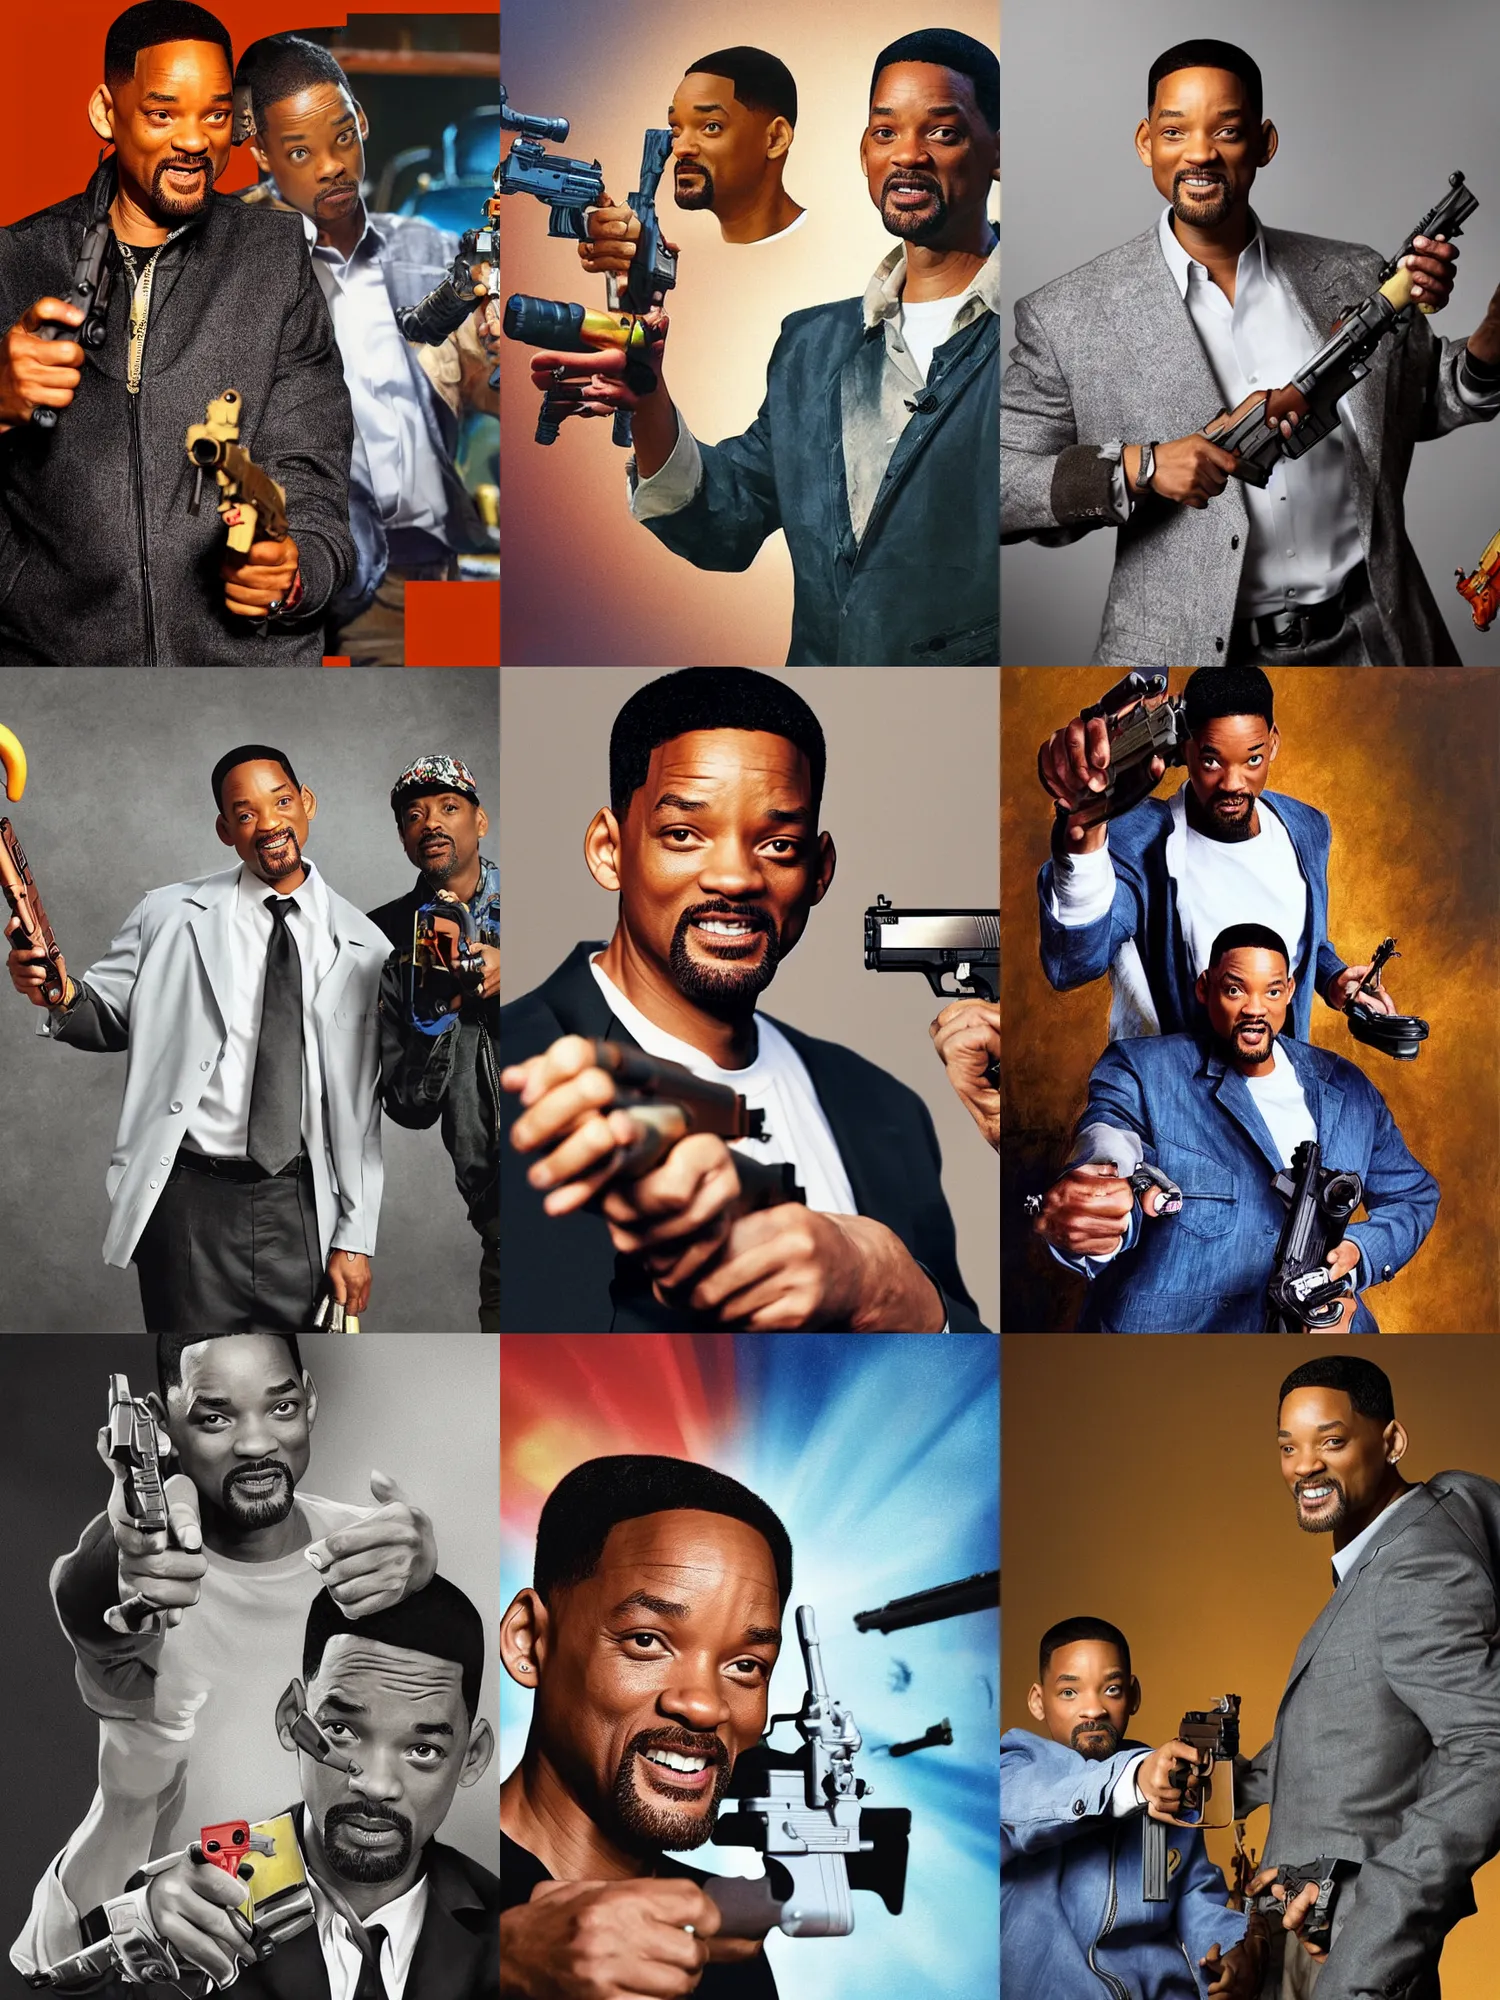 Prompt: Will smith holding a toy gun with a slapper hand on it pointing it at Chris rock, well lit, digital art, virtuosic painting, award winning, high quality, visual, sharp, backlit, gorgeous lighting